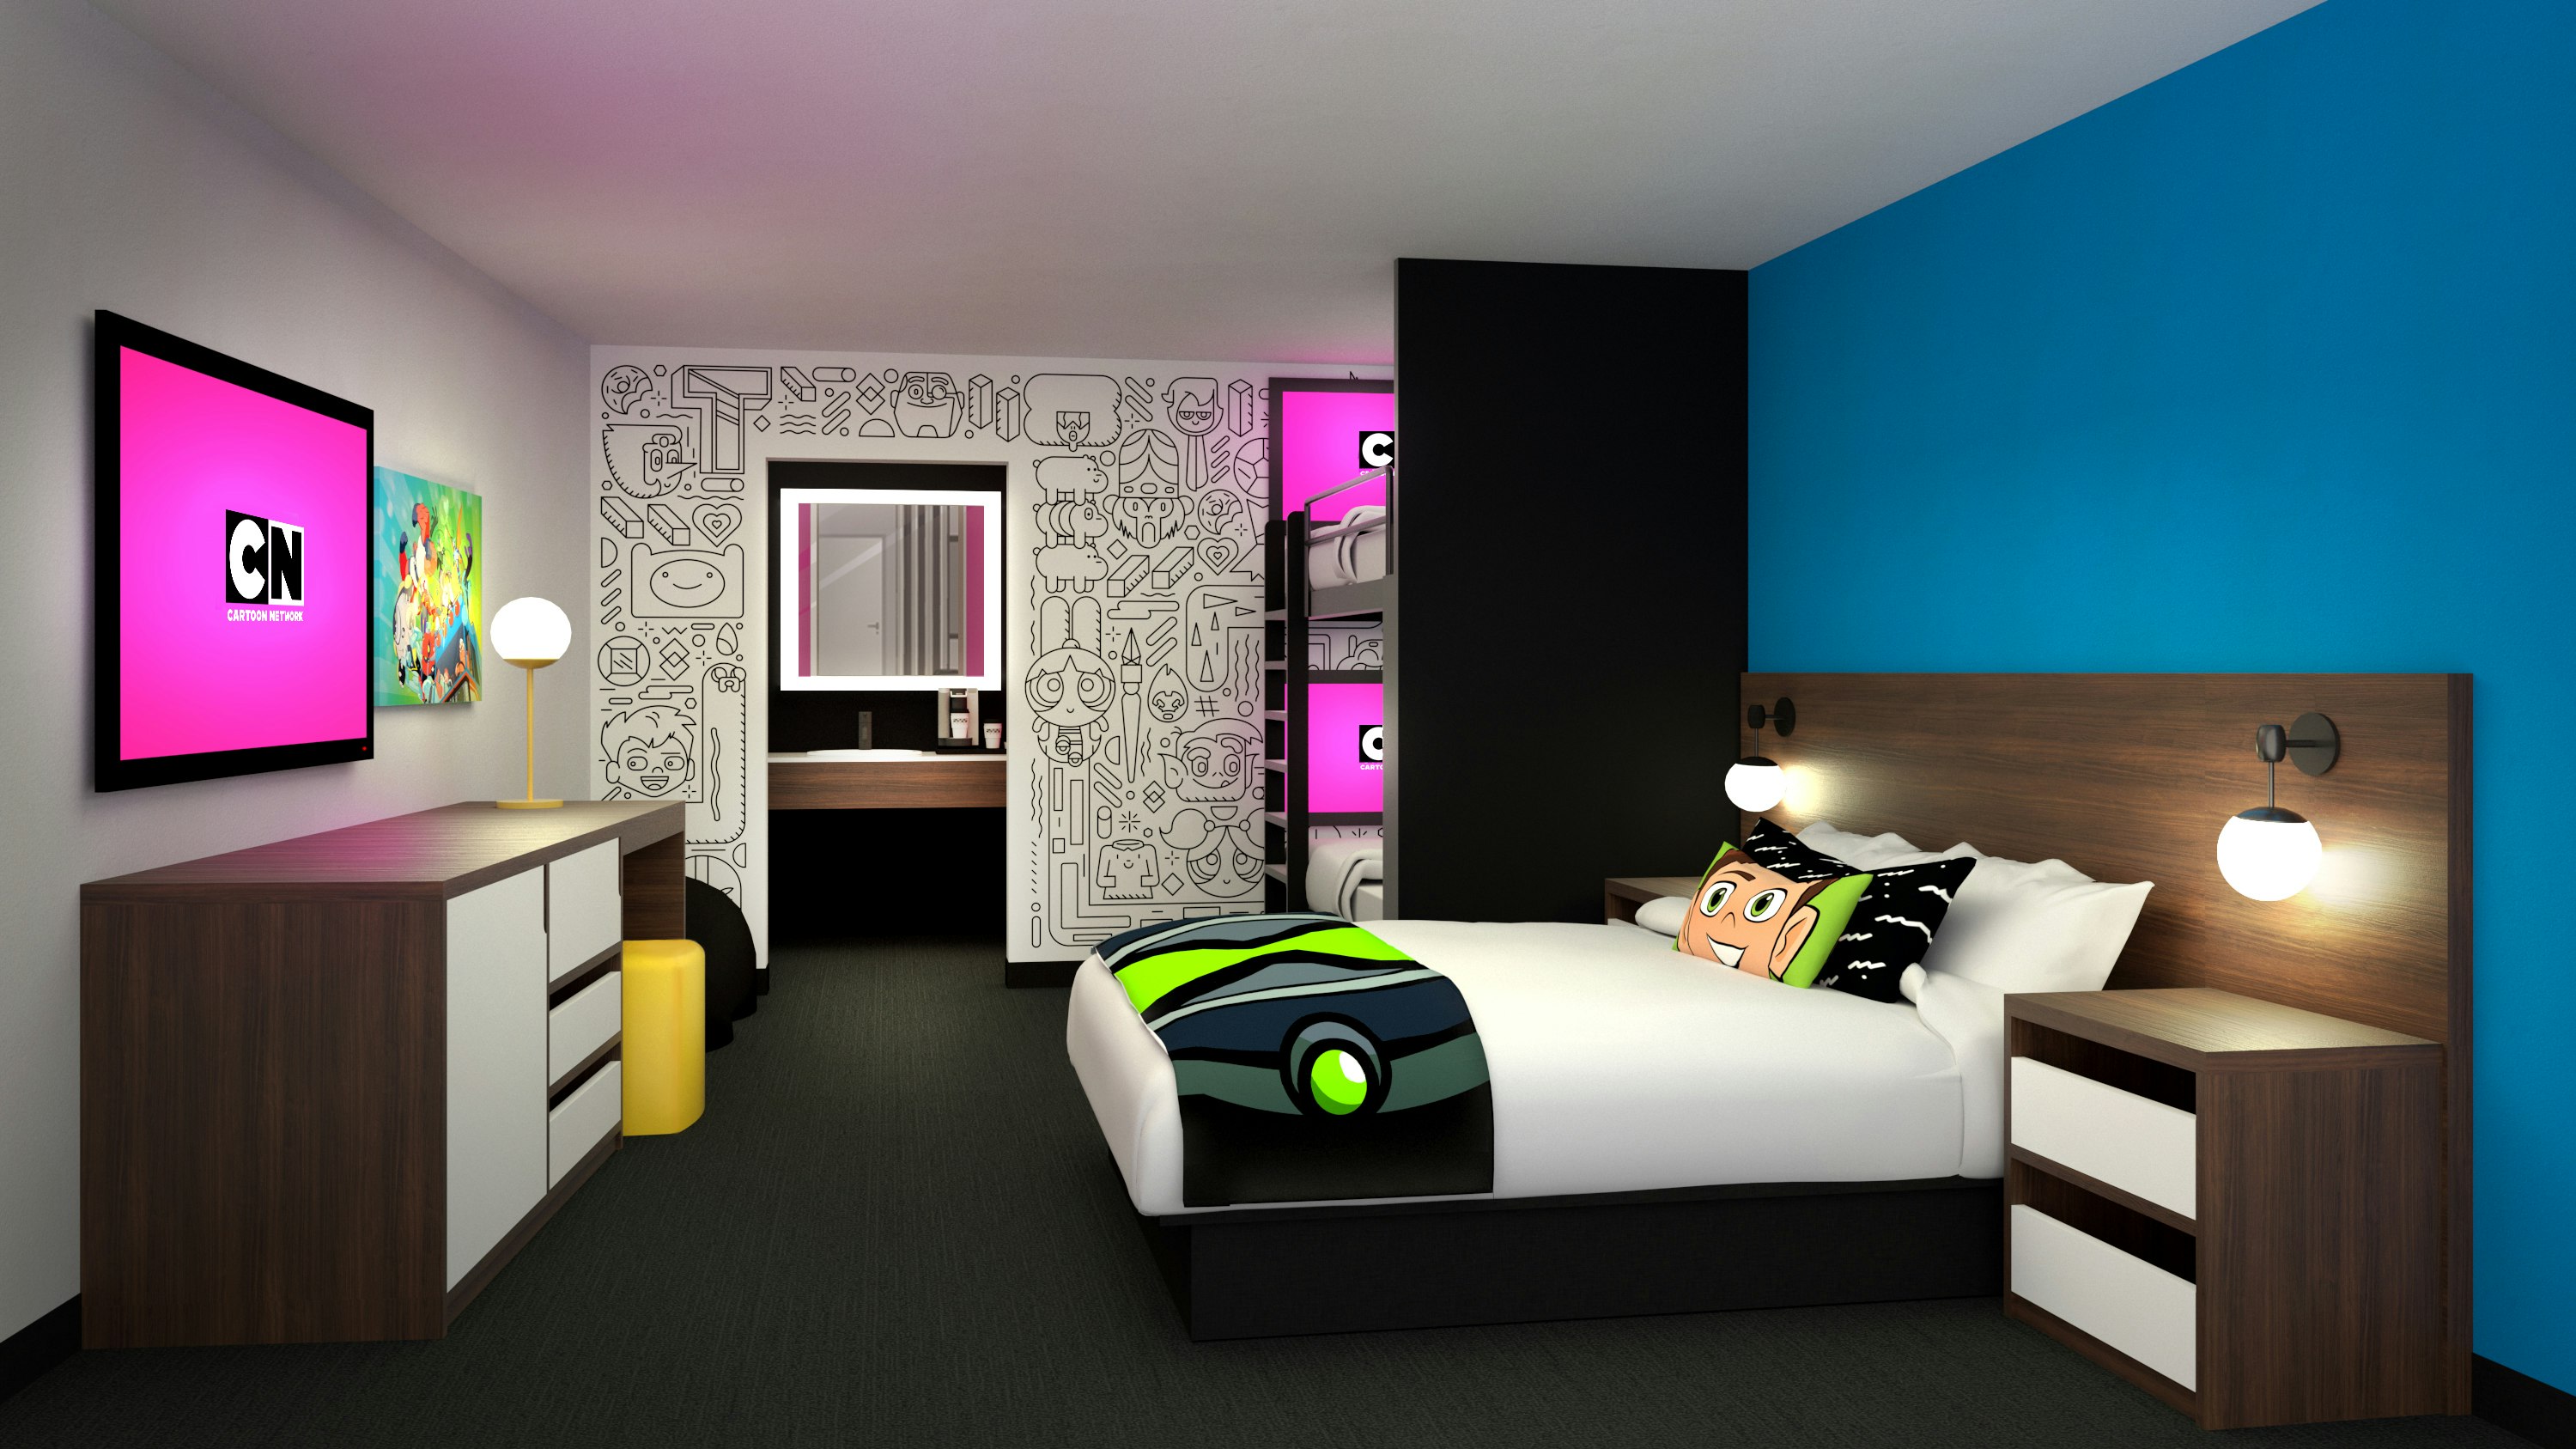 Cartoon Network is opening its very own hotel in 2020 - Lonely Planet